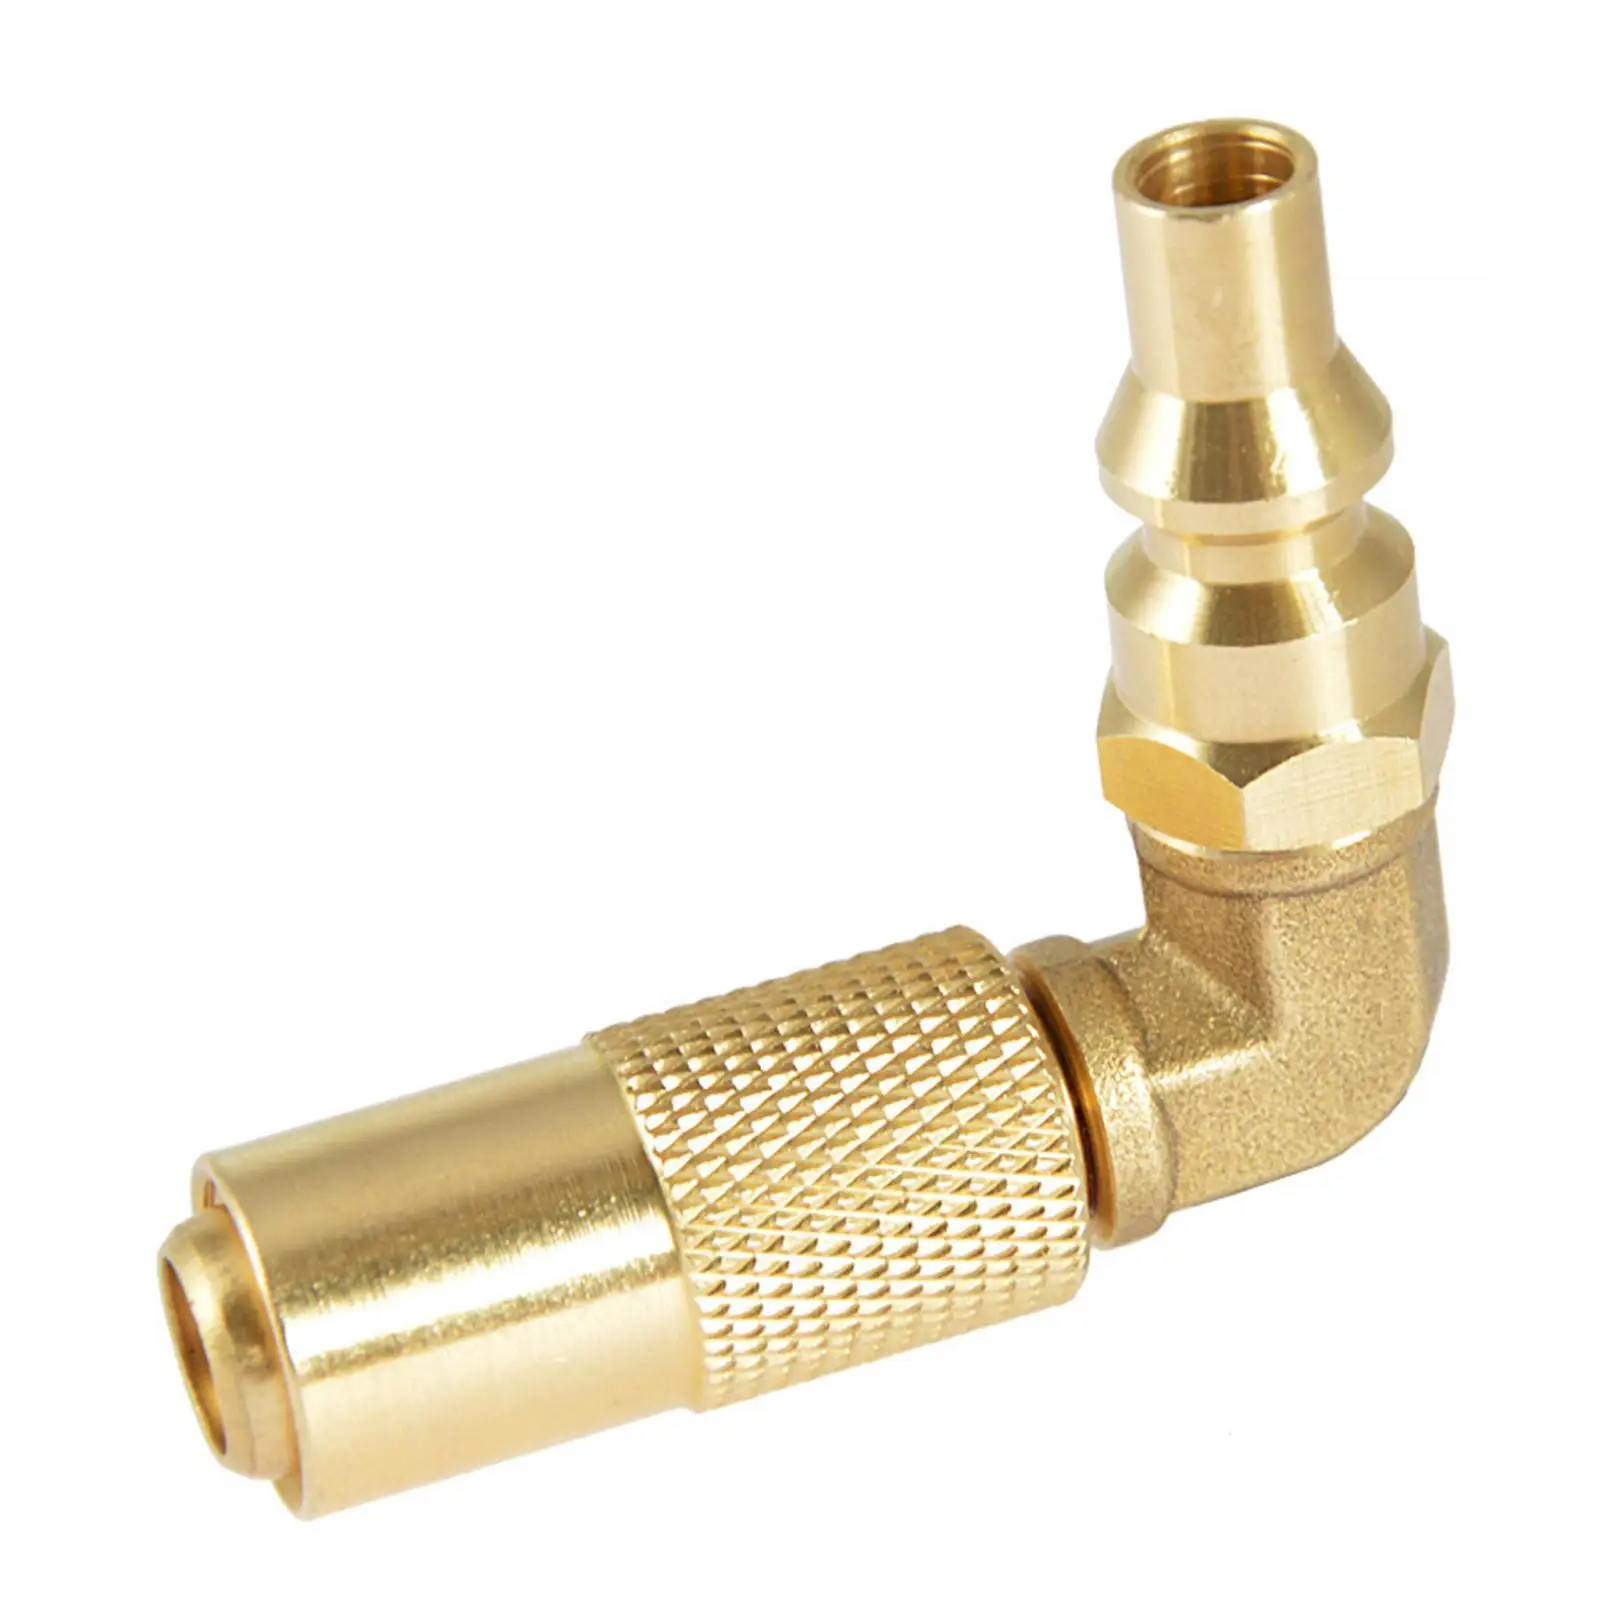 1/4 inch RV Quick Connect Elbow Adapter Conversion Fitting Brass Propane Gas Propane Elbow Adapter for Trailer Camping Grill RV